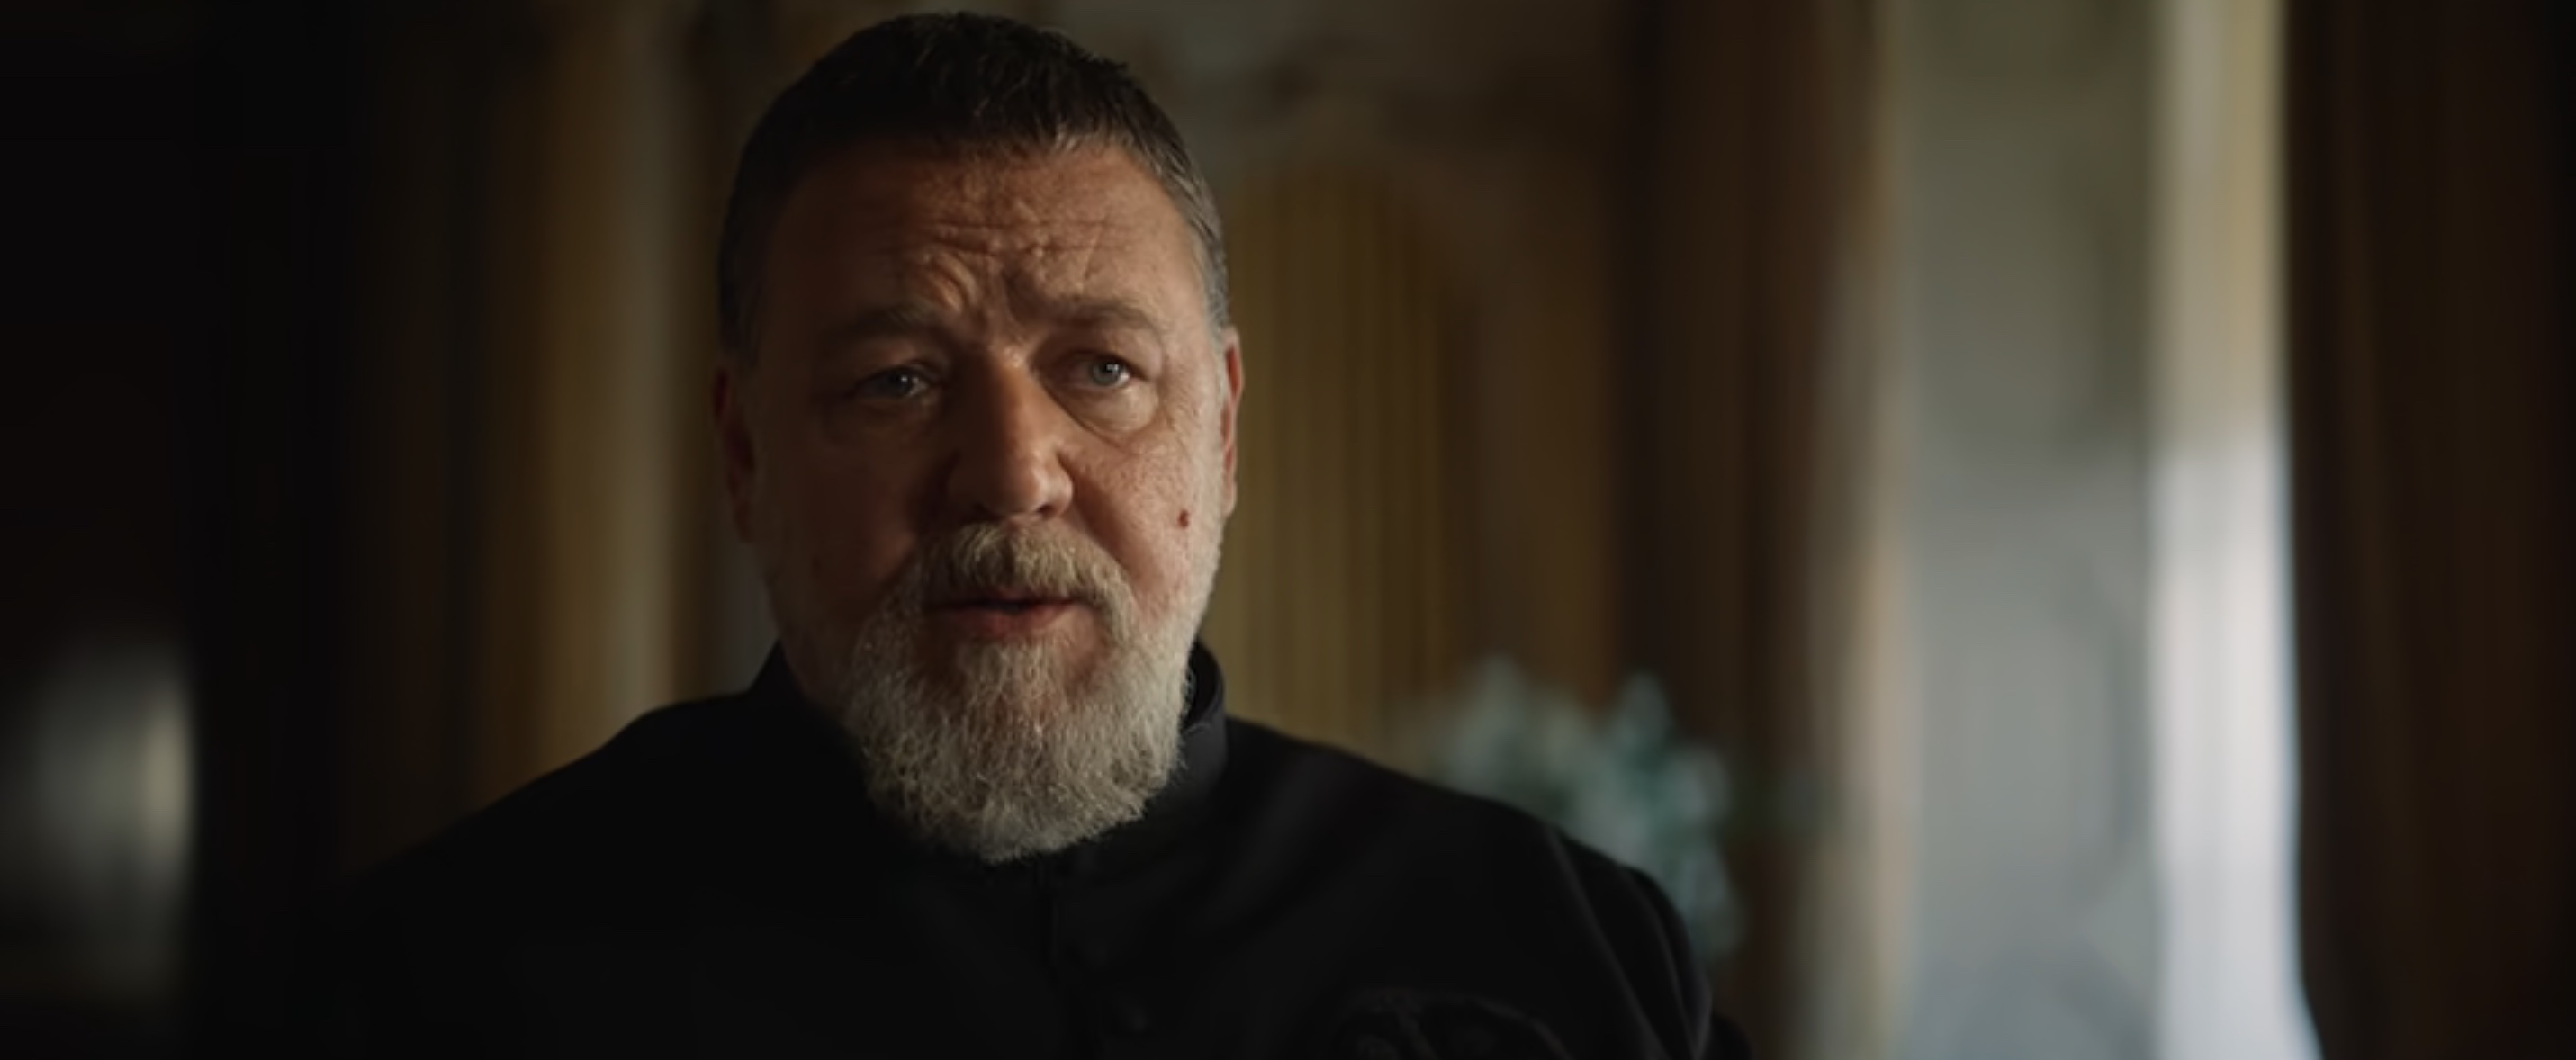 The Pope's Exorcist Cast on Netflix - Russell Crowe as Father Gabriele Amorth